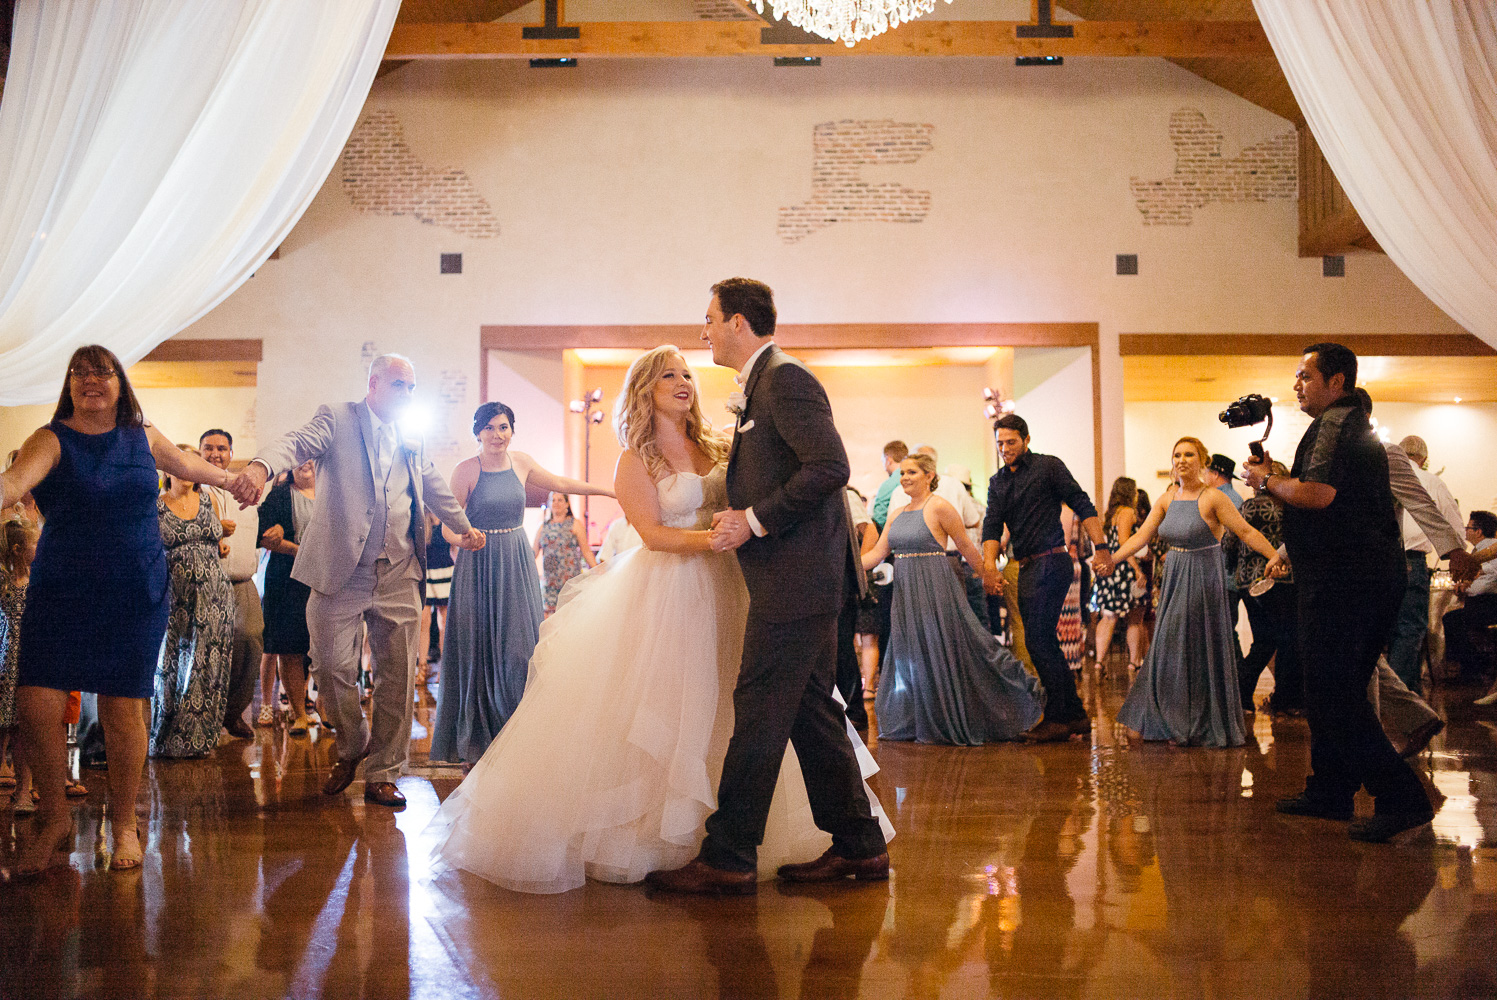 Couple Kailey and Grant havetheir first dance together at Chandelier of Gruene Wedding Reception-47